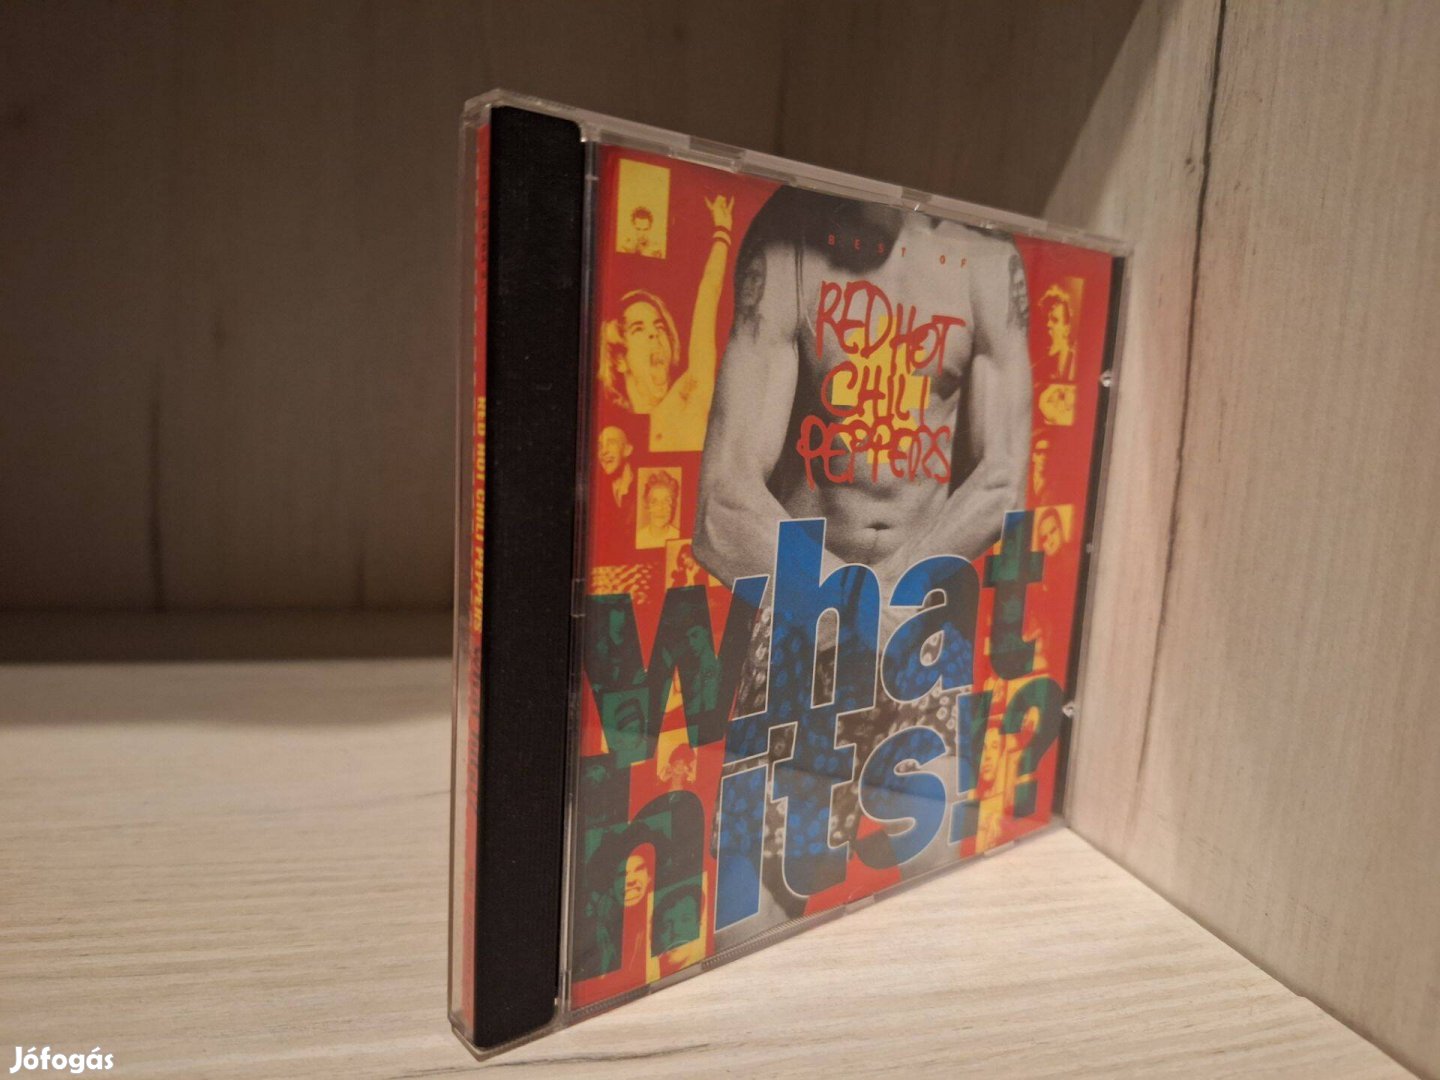 Red Hot Chili Peppers - What Hits!? CD